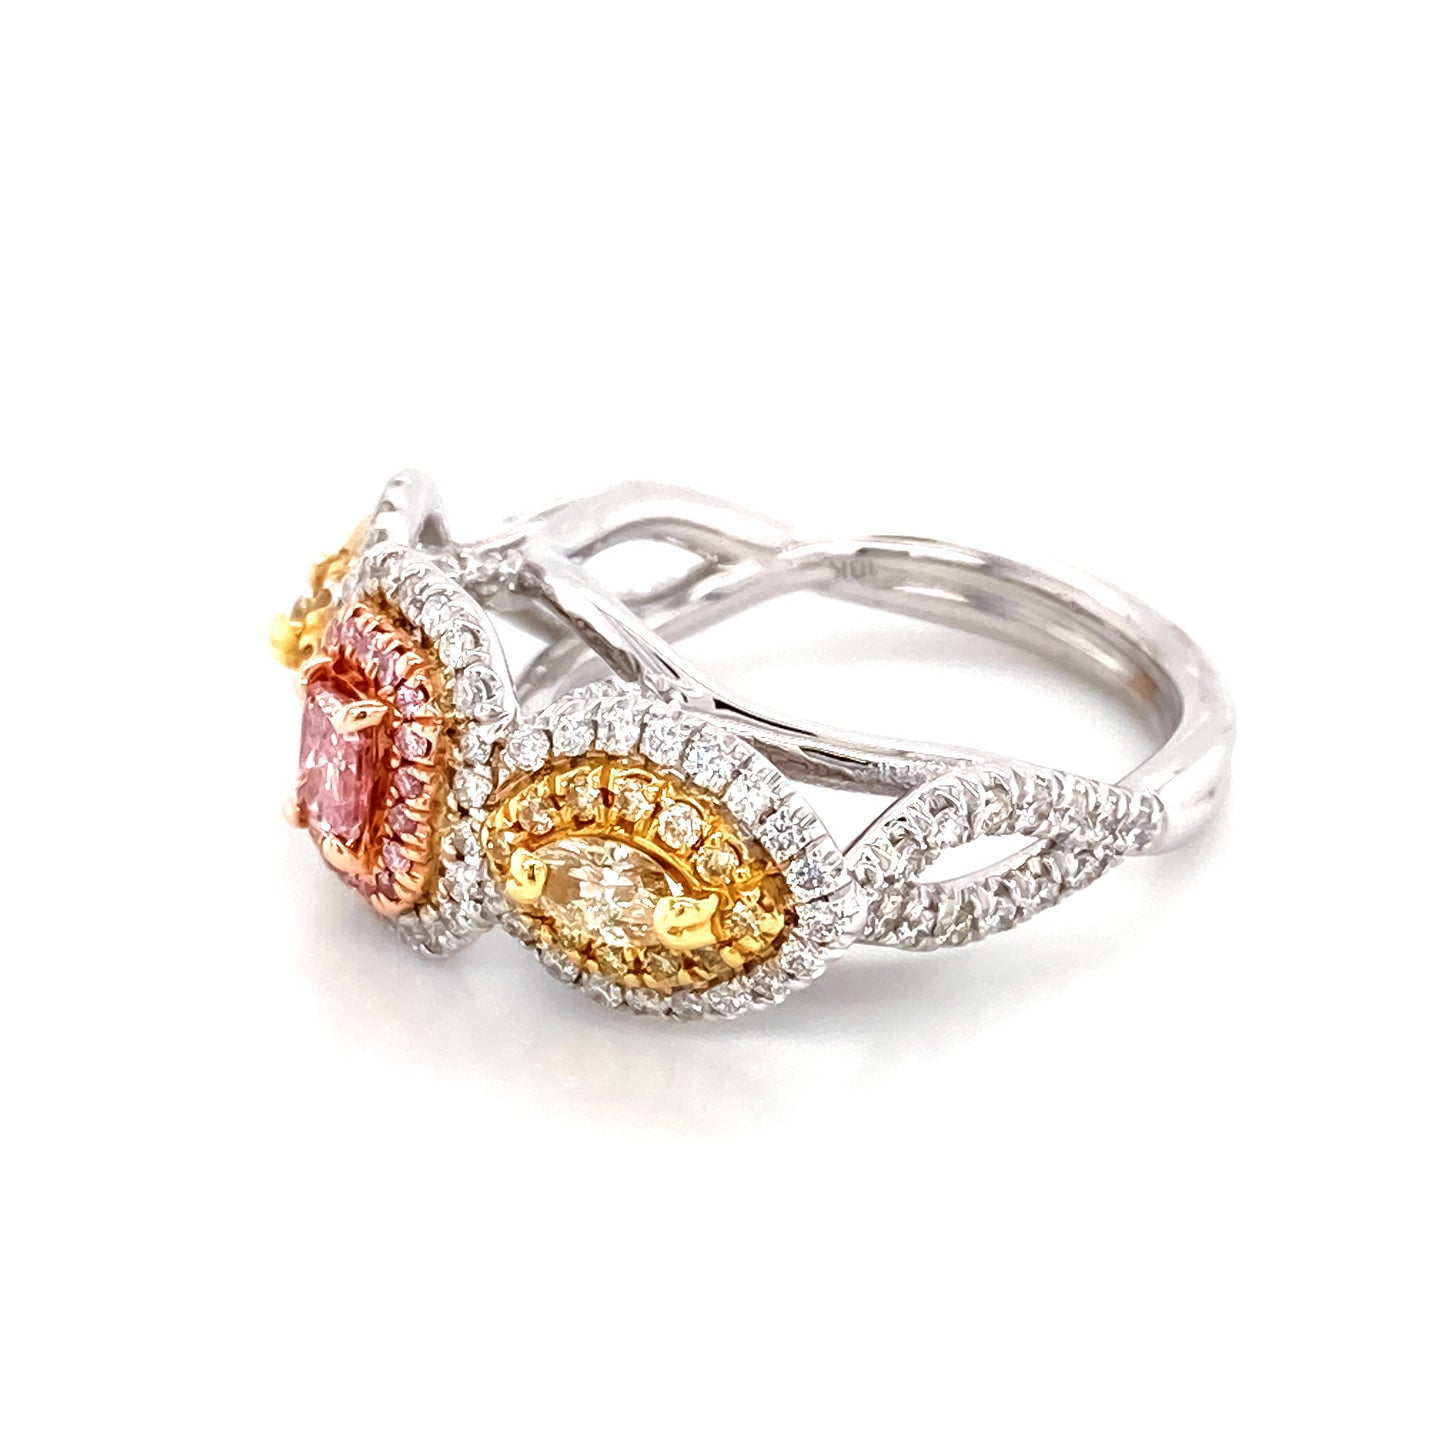 1.22 Cts Tricolor Natural Fancy Intense Pink and Yellow Diamond Ring GIA